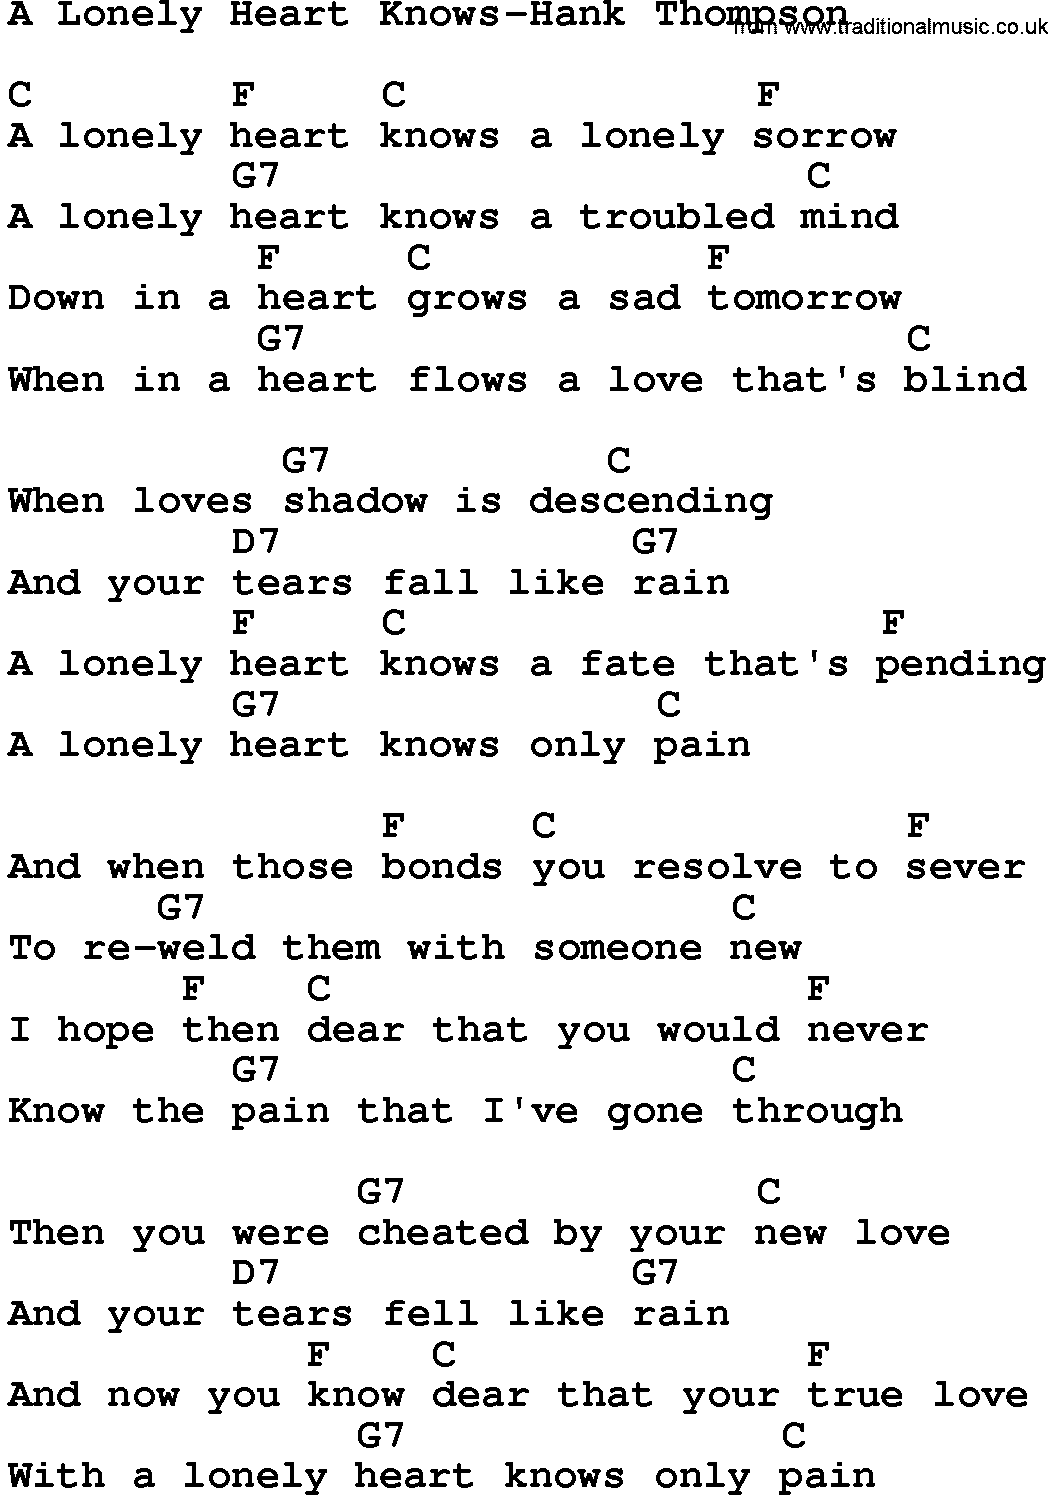 Country music song: A Lonely Heart Knows-Hank Thompson lyrics and chords